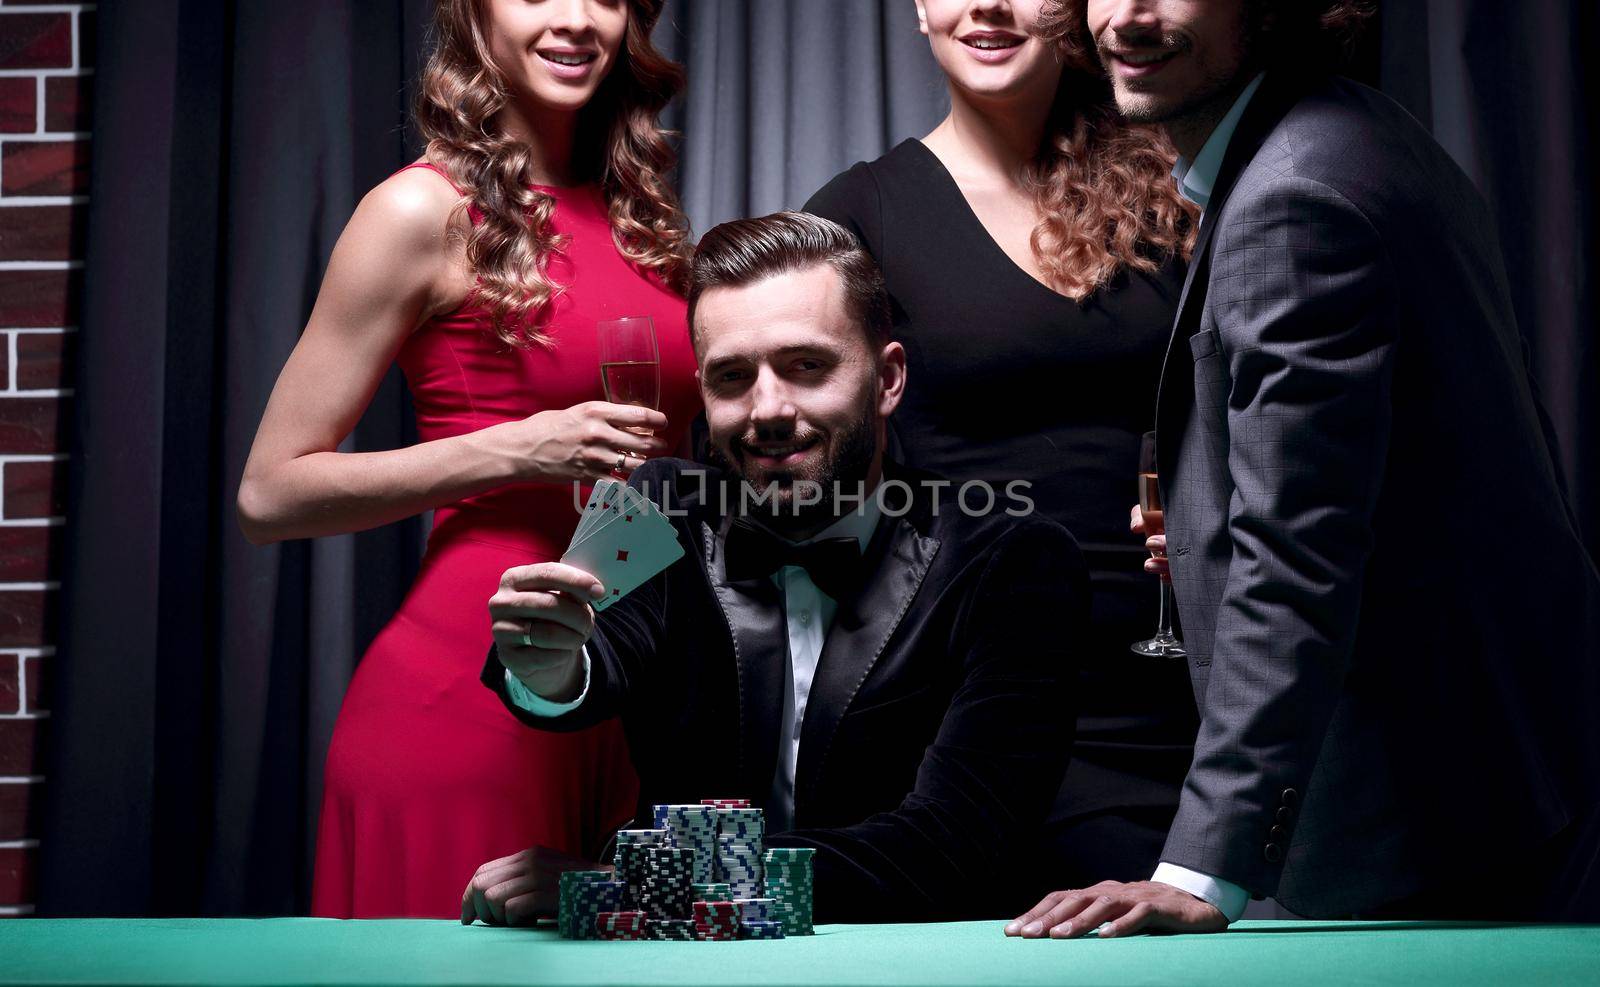 A man, accompanied by a woman, shows four aces in poker